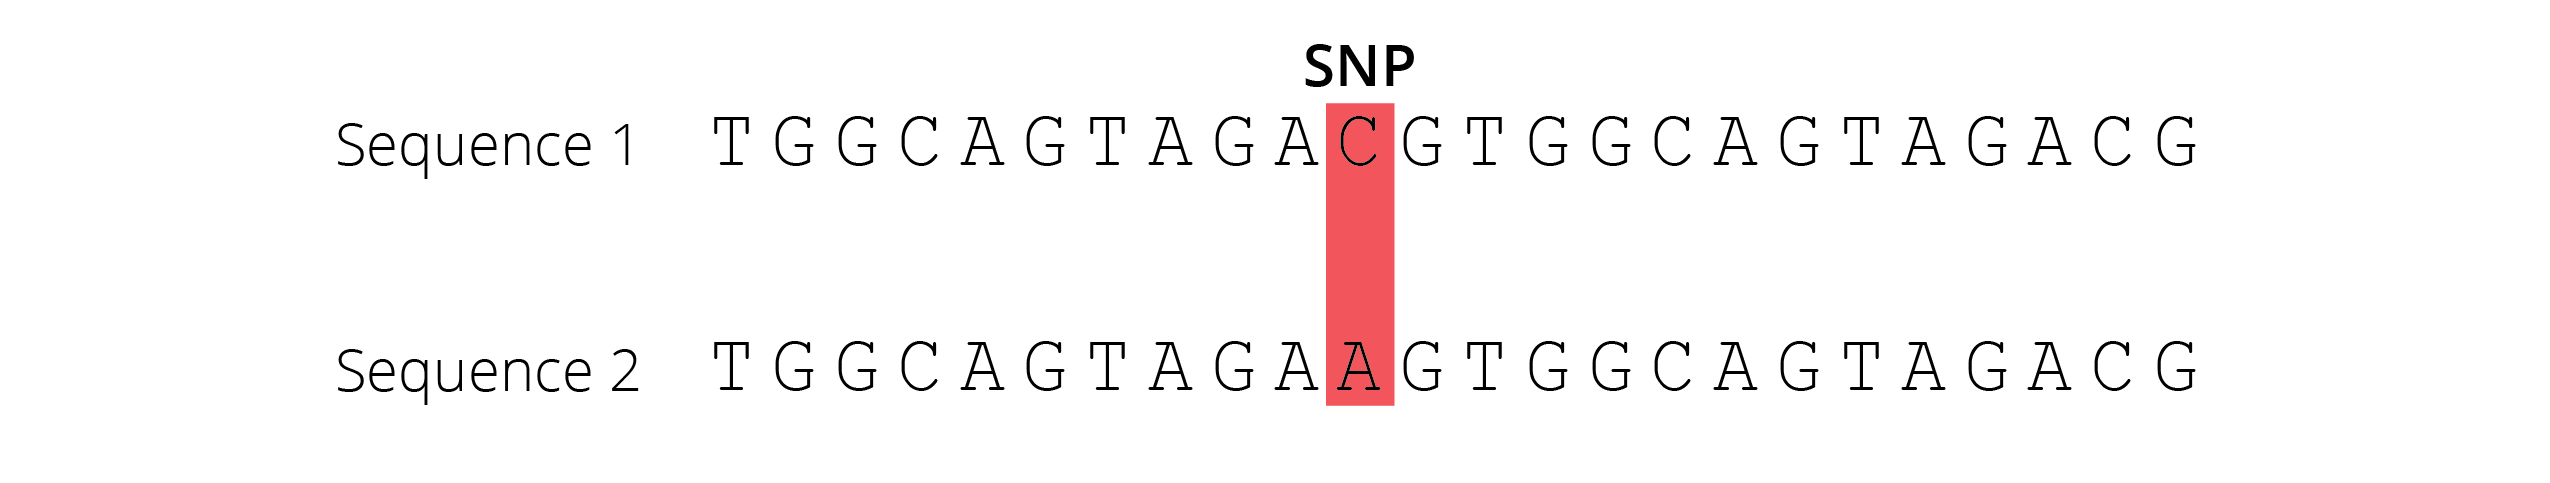 A Single Nucleotide Polymorphism (SNP) is a change of nucleotides at a single base-pair location on DNA.